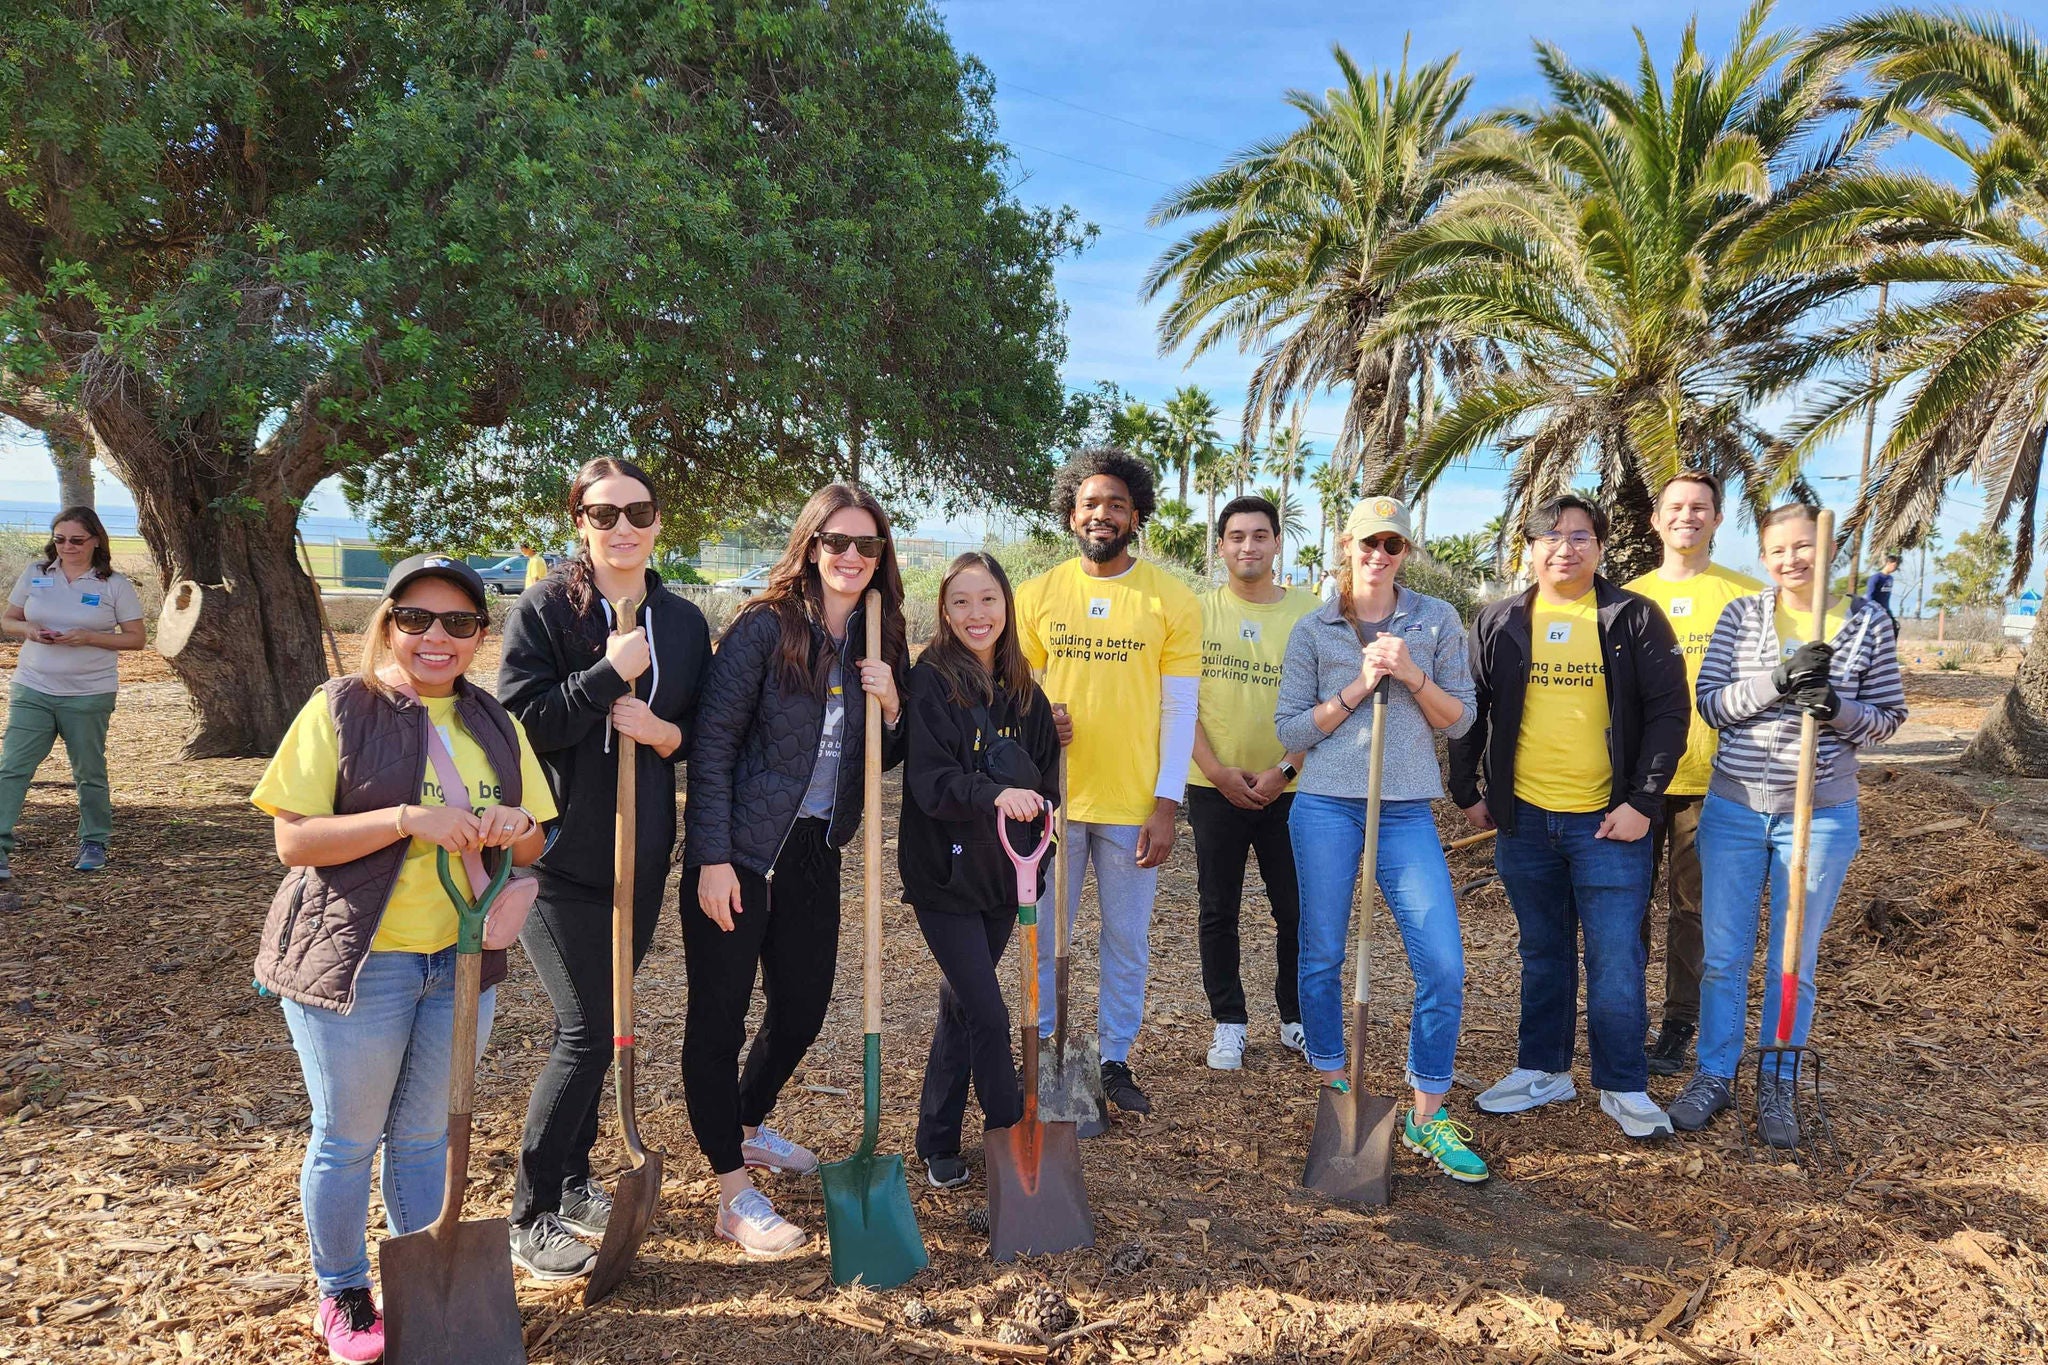 EY CD Los Angeles Palos Verdes Peninsula Land Conservancy Team working at the conservancy